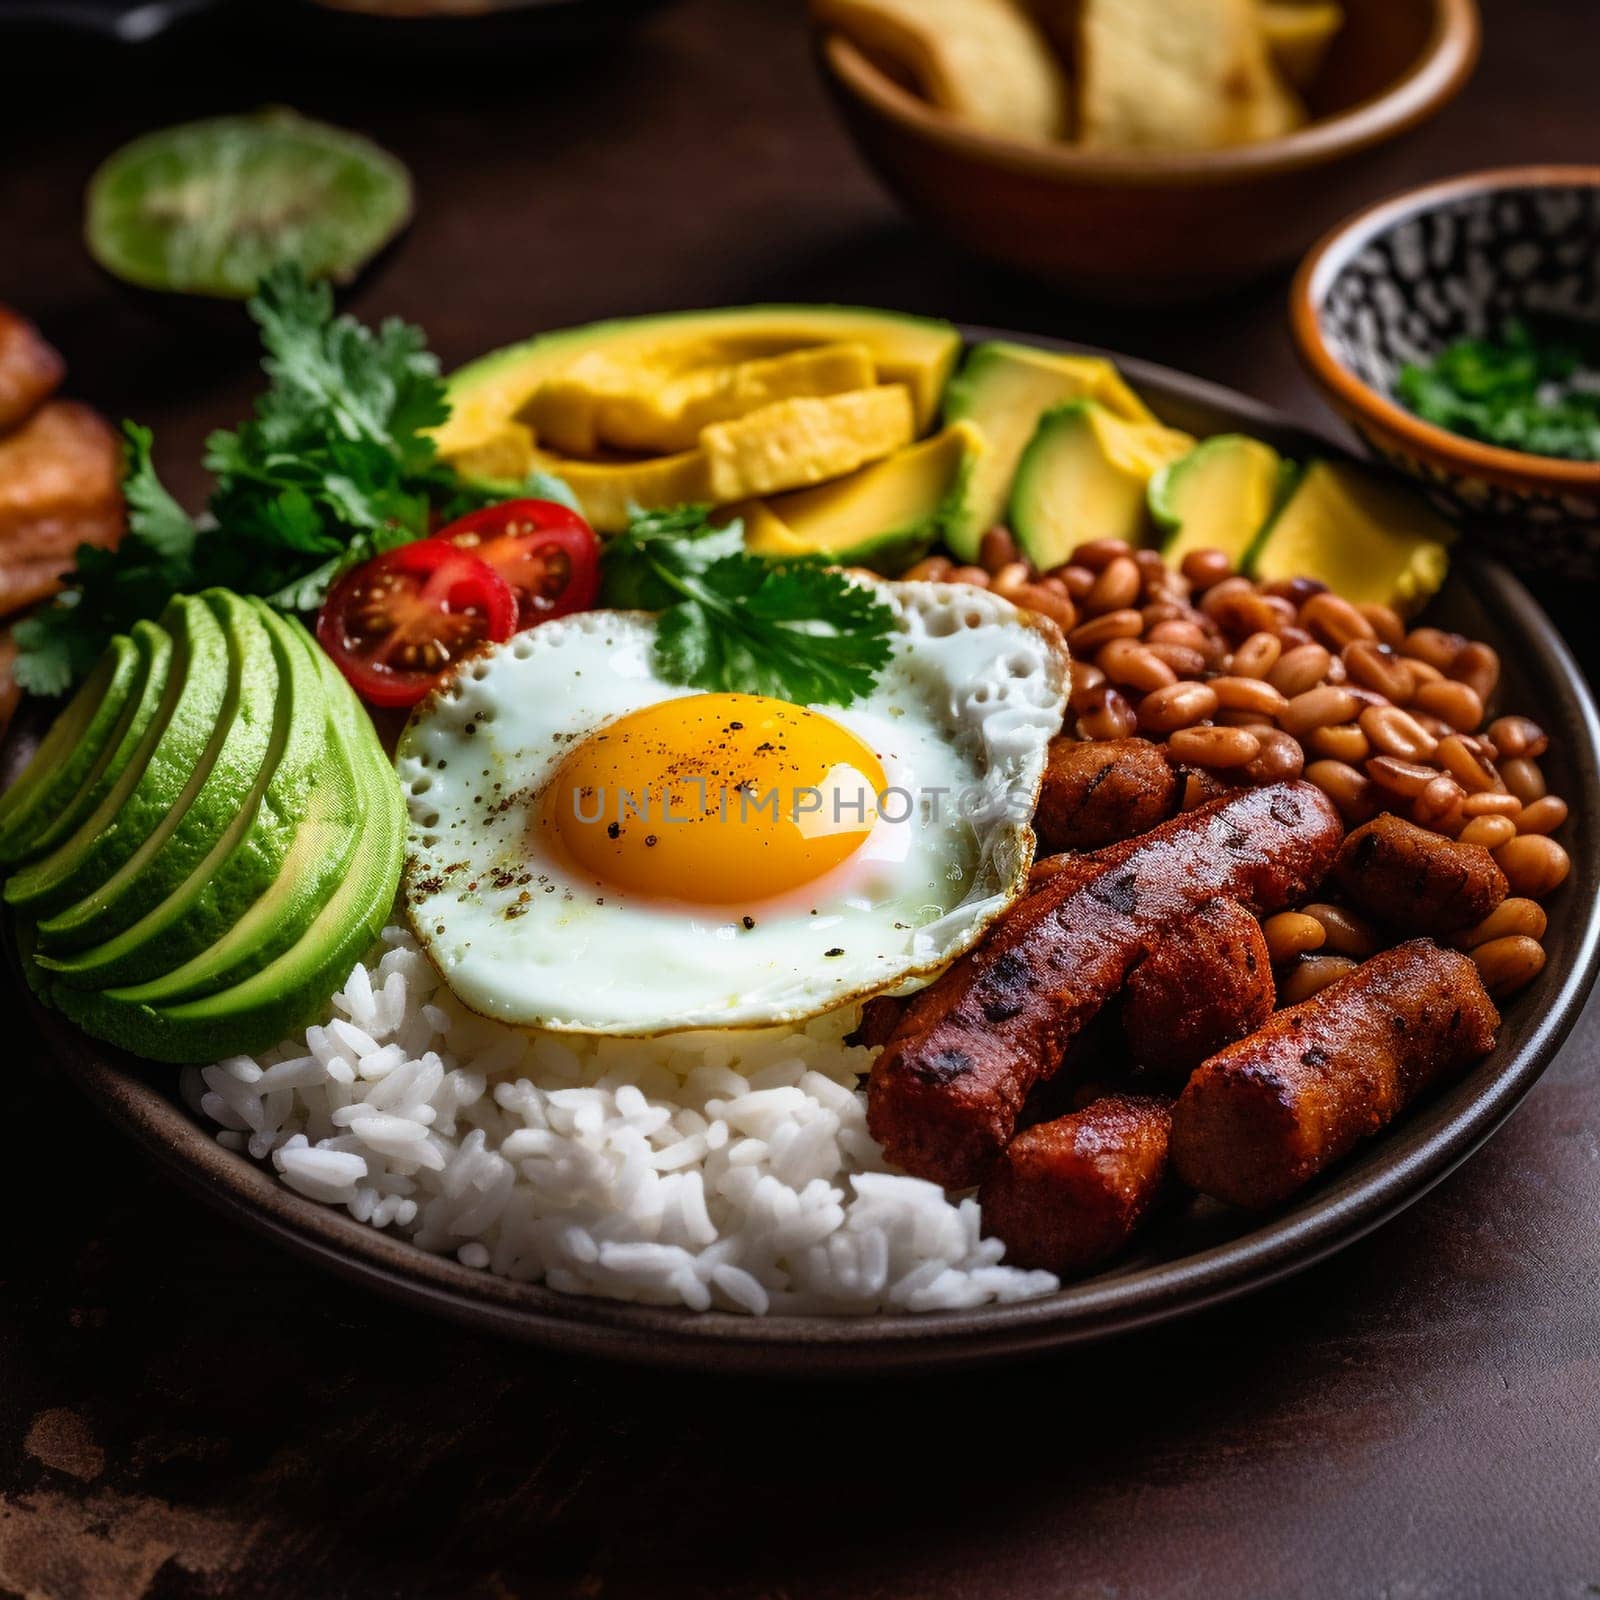 Experience the vibrant flavors and festive atmosphere of a Colombian Bandeja Paisa (mixed platter) in this close-up shot. The dish features a hearty combination of rice, beans, ground meat, chorizo, fried egg, plantains, and avocado, all arranged artfully on a large plate. The dish is garnished with finely chopped cilantro leaves and lime wedges for added freshness. In the background, there's a lively street market scene, with colorful vendors and cheerful music adding to the festive atmosphere. The bright, natural lighting with a reflector enhances the texture and colors of the food, creating a lively and celebratory mood.